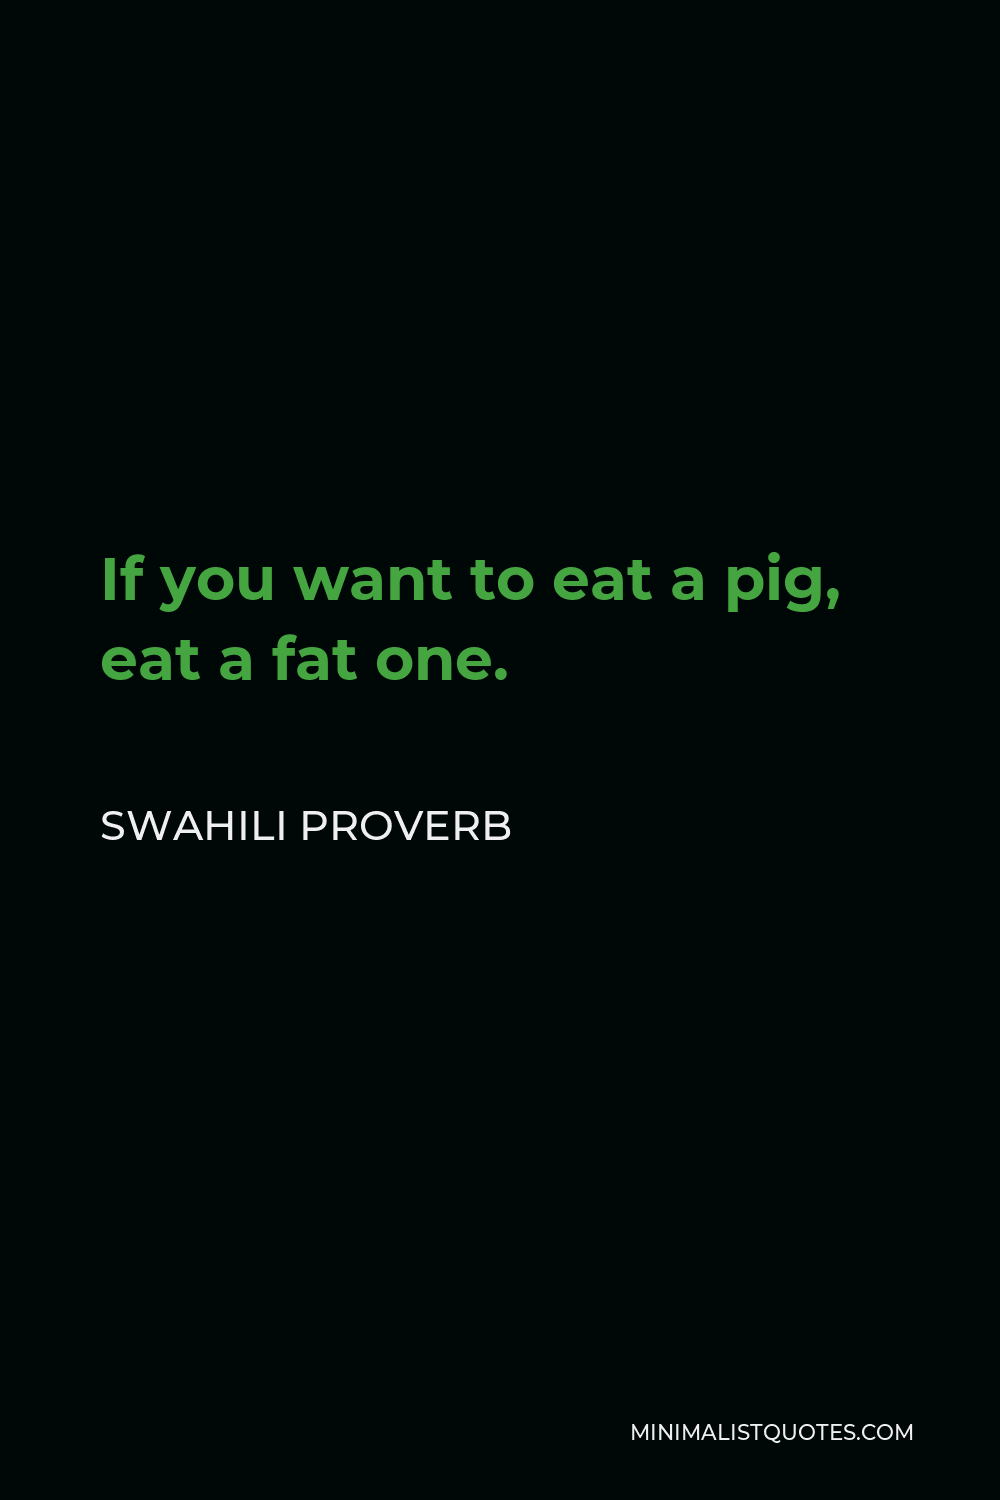 Swahili Proverb Quote - If you want to eat a pig, eat a fat one.